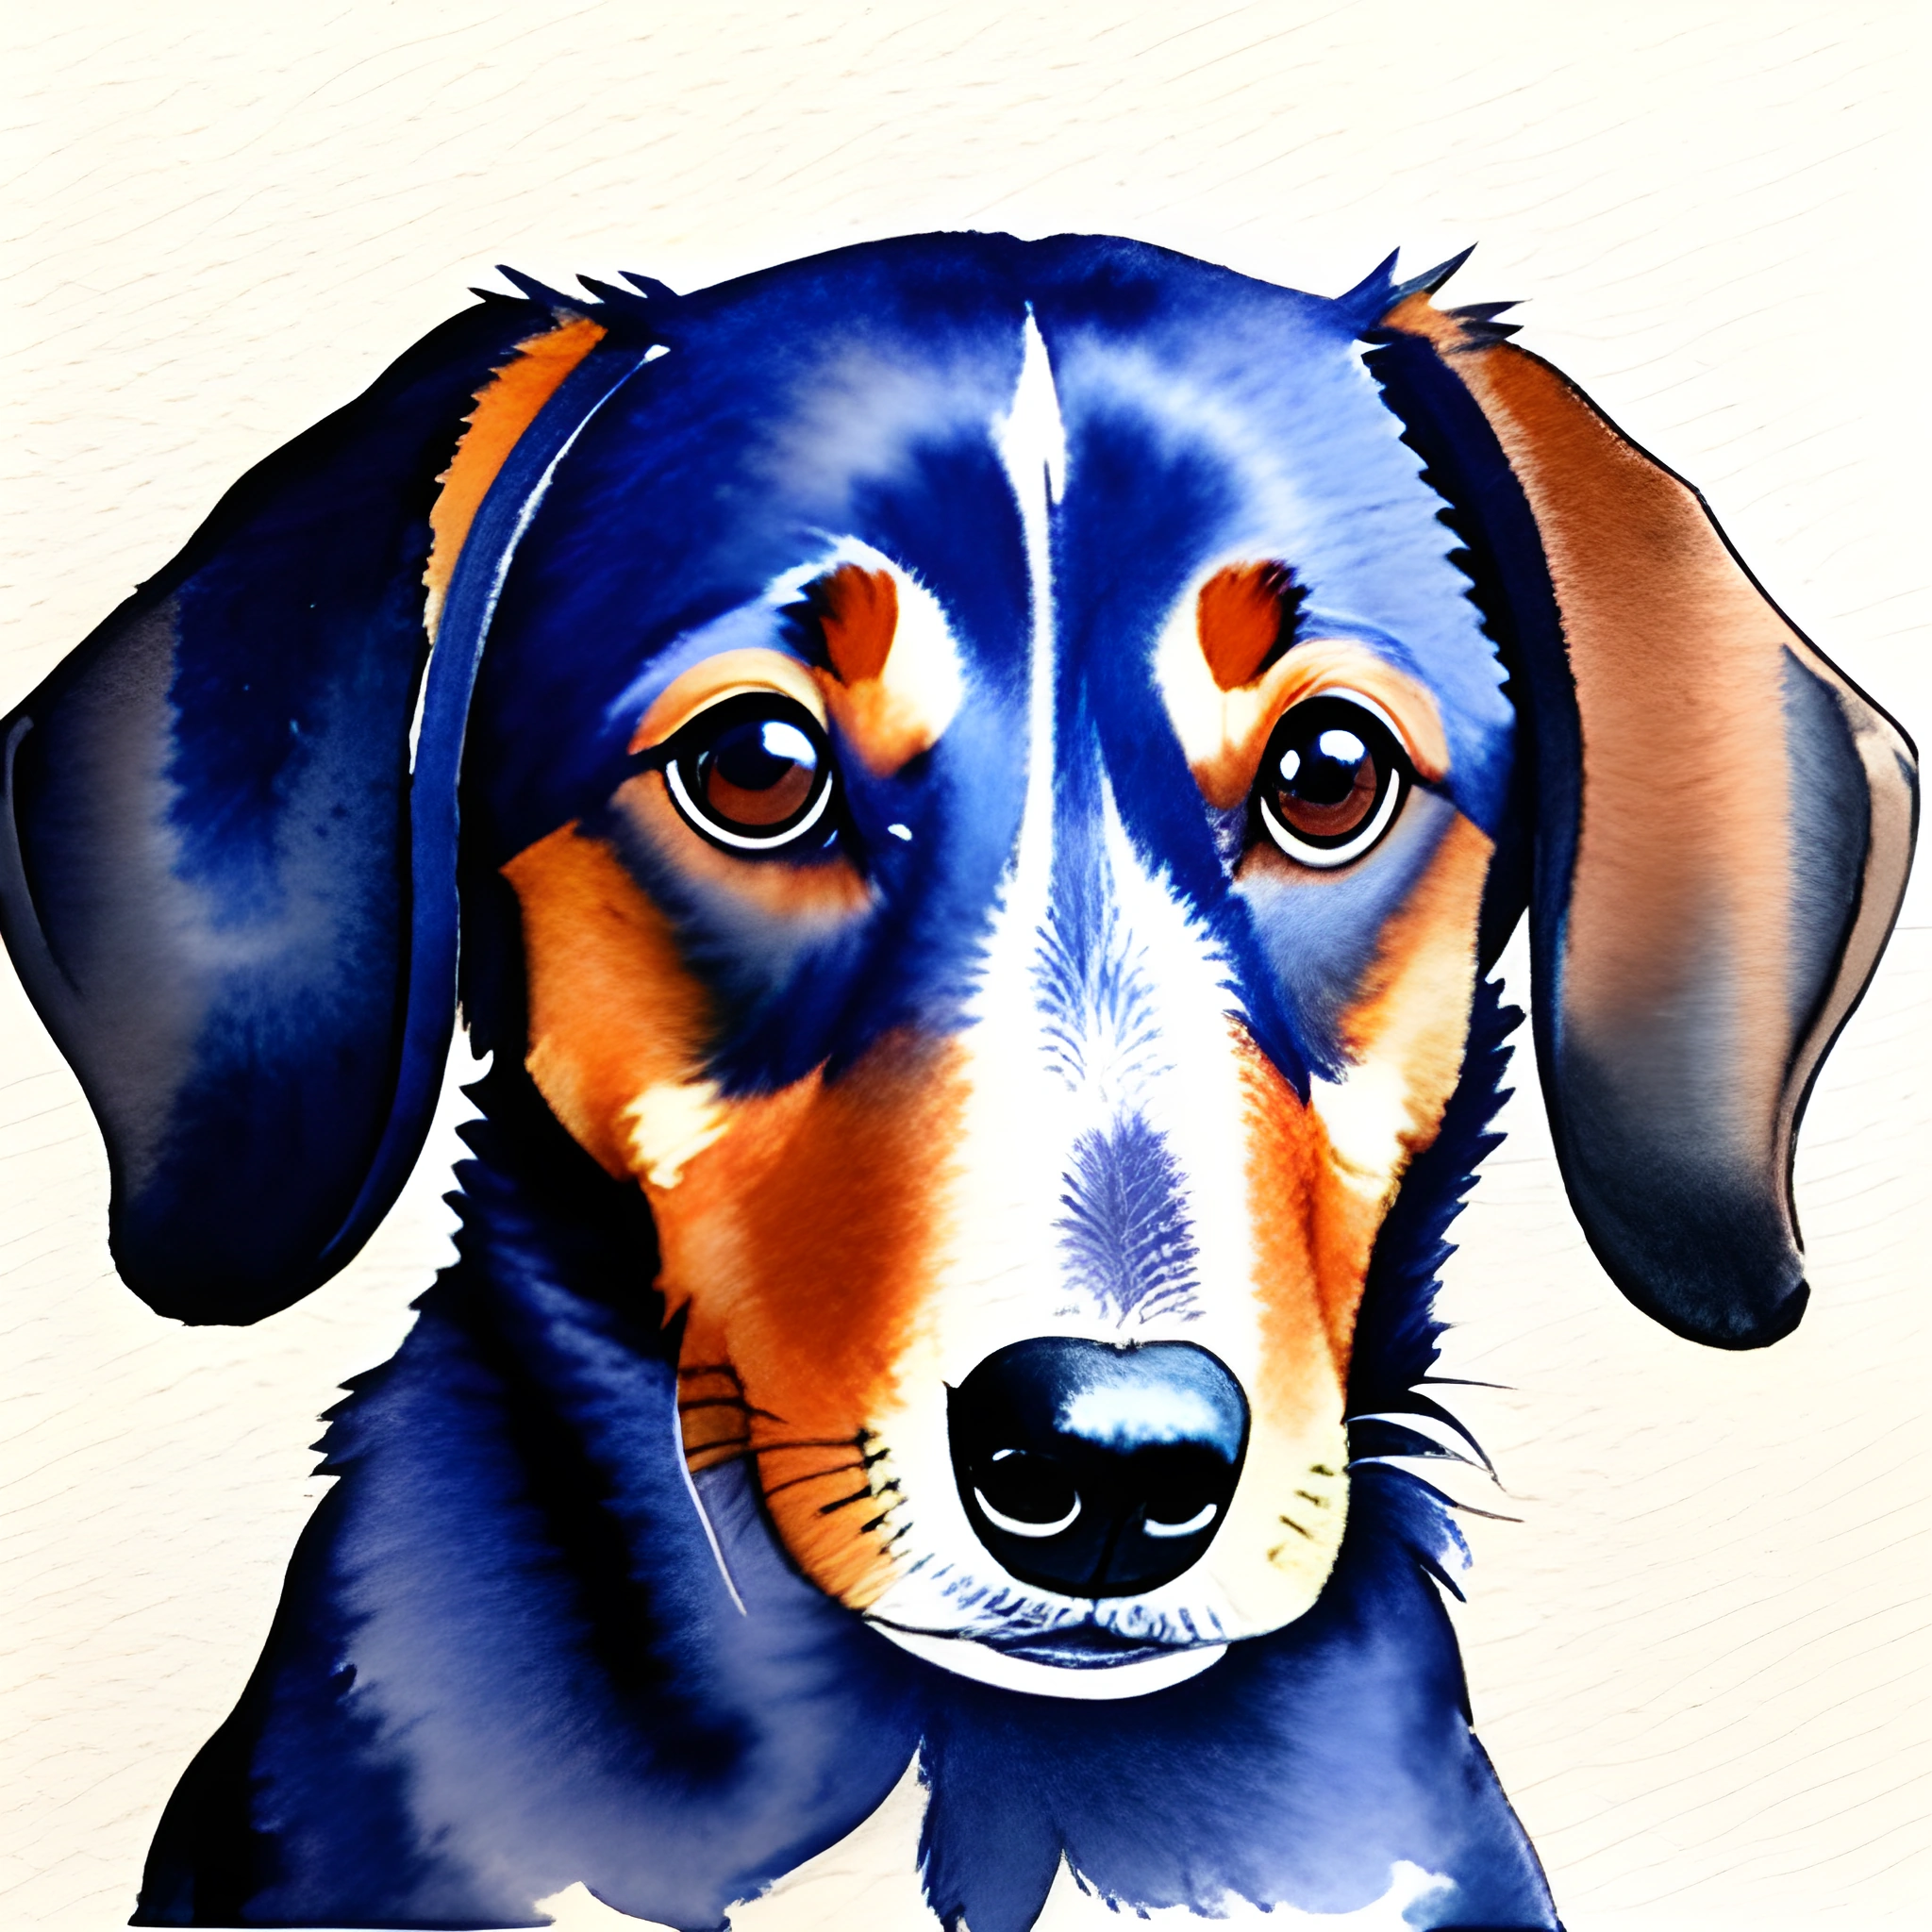 painting of a dog with a blue and orange face